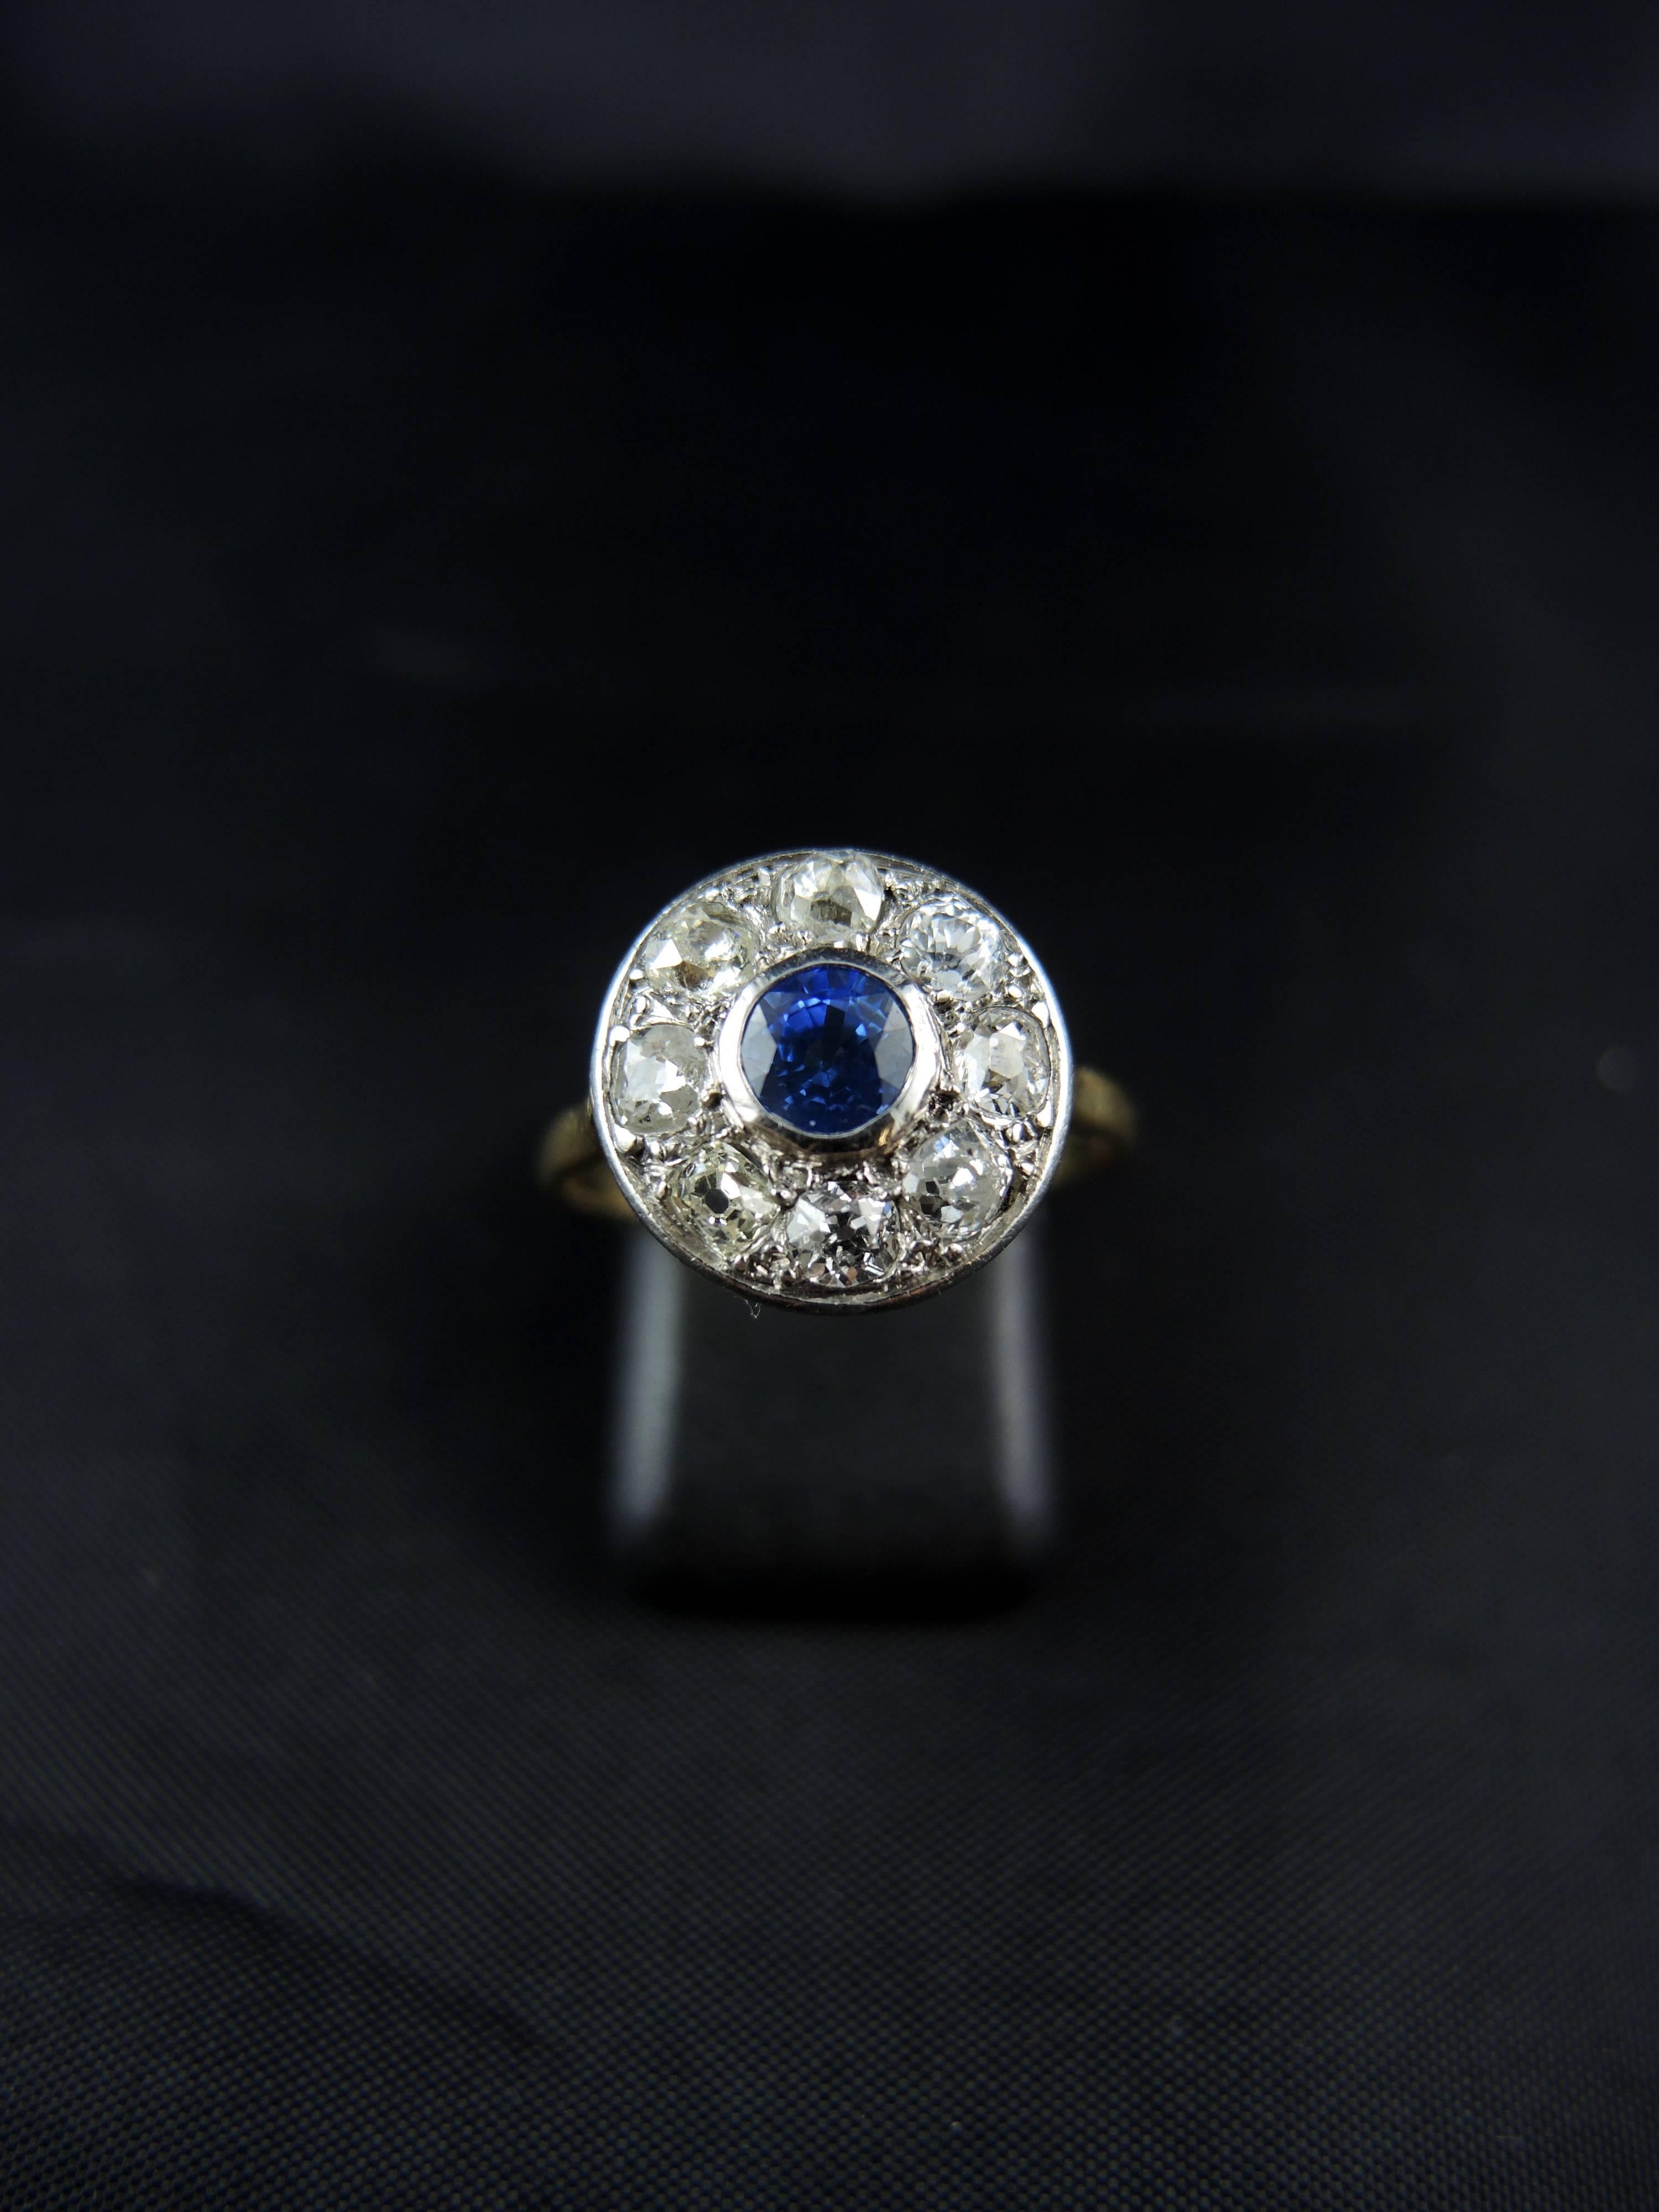 18kt gold and platinium cluster ring (quality mark: owl and mascaron) set with a central round sapphire, weighting apx 0.50 Ct, surrounded with old cut diamonds, total weight estimated around 1,00 Ct.

Circa 1920.

Weight: 3,60 g
Ring size: 55